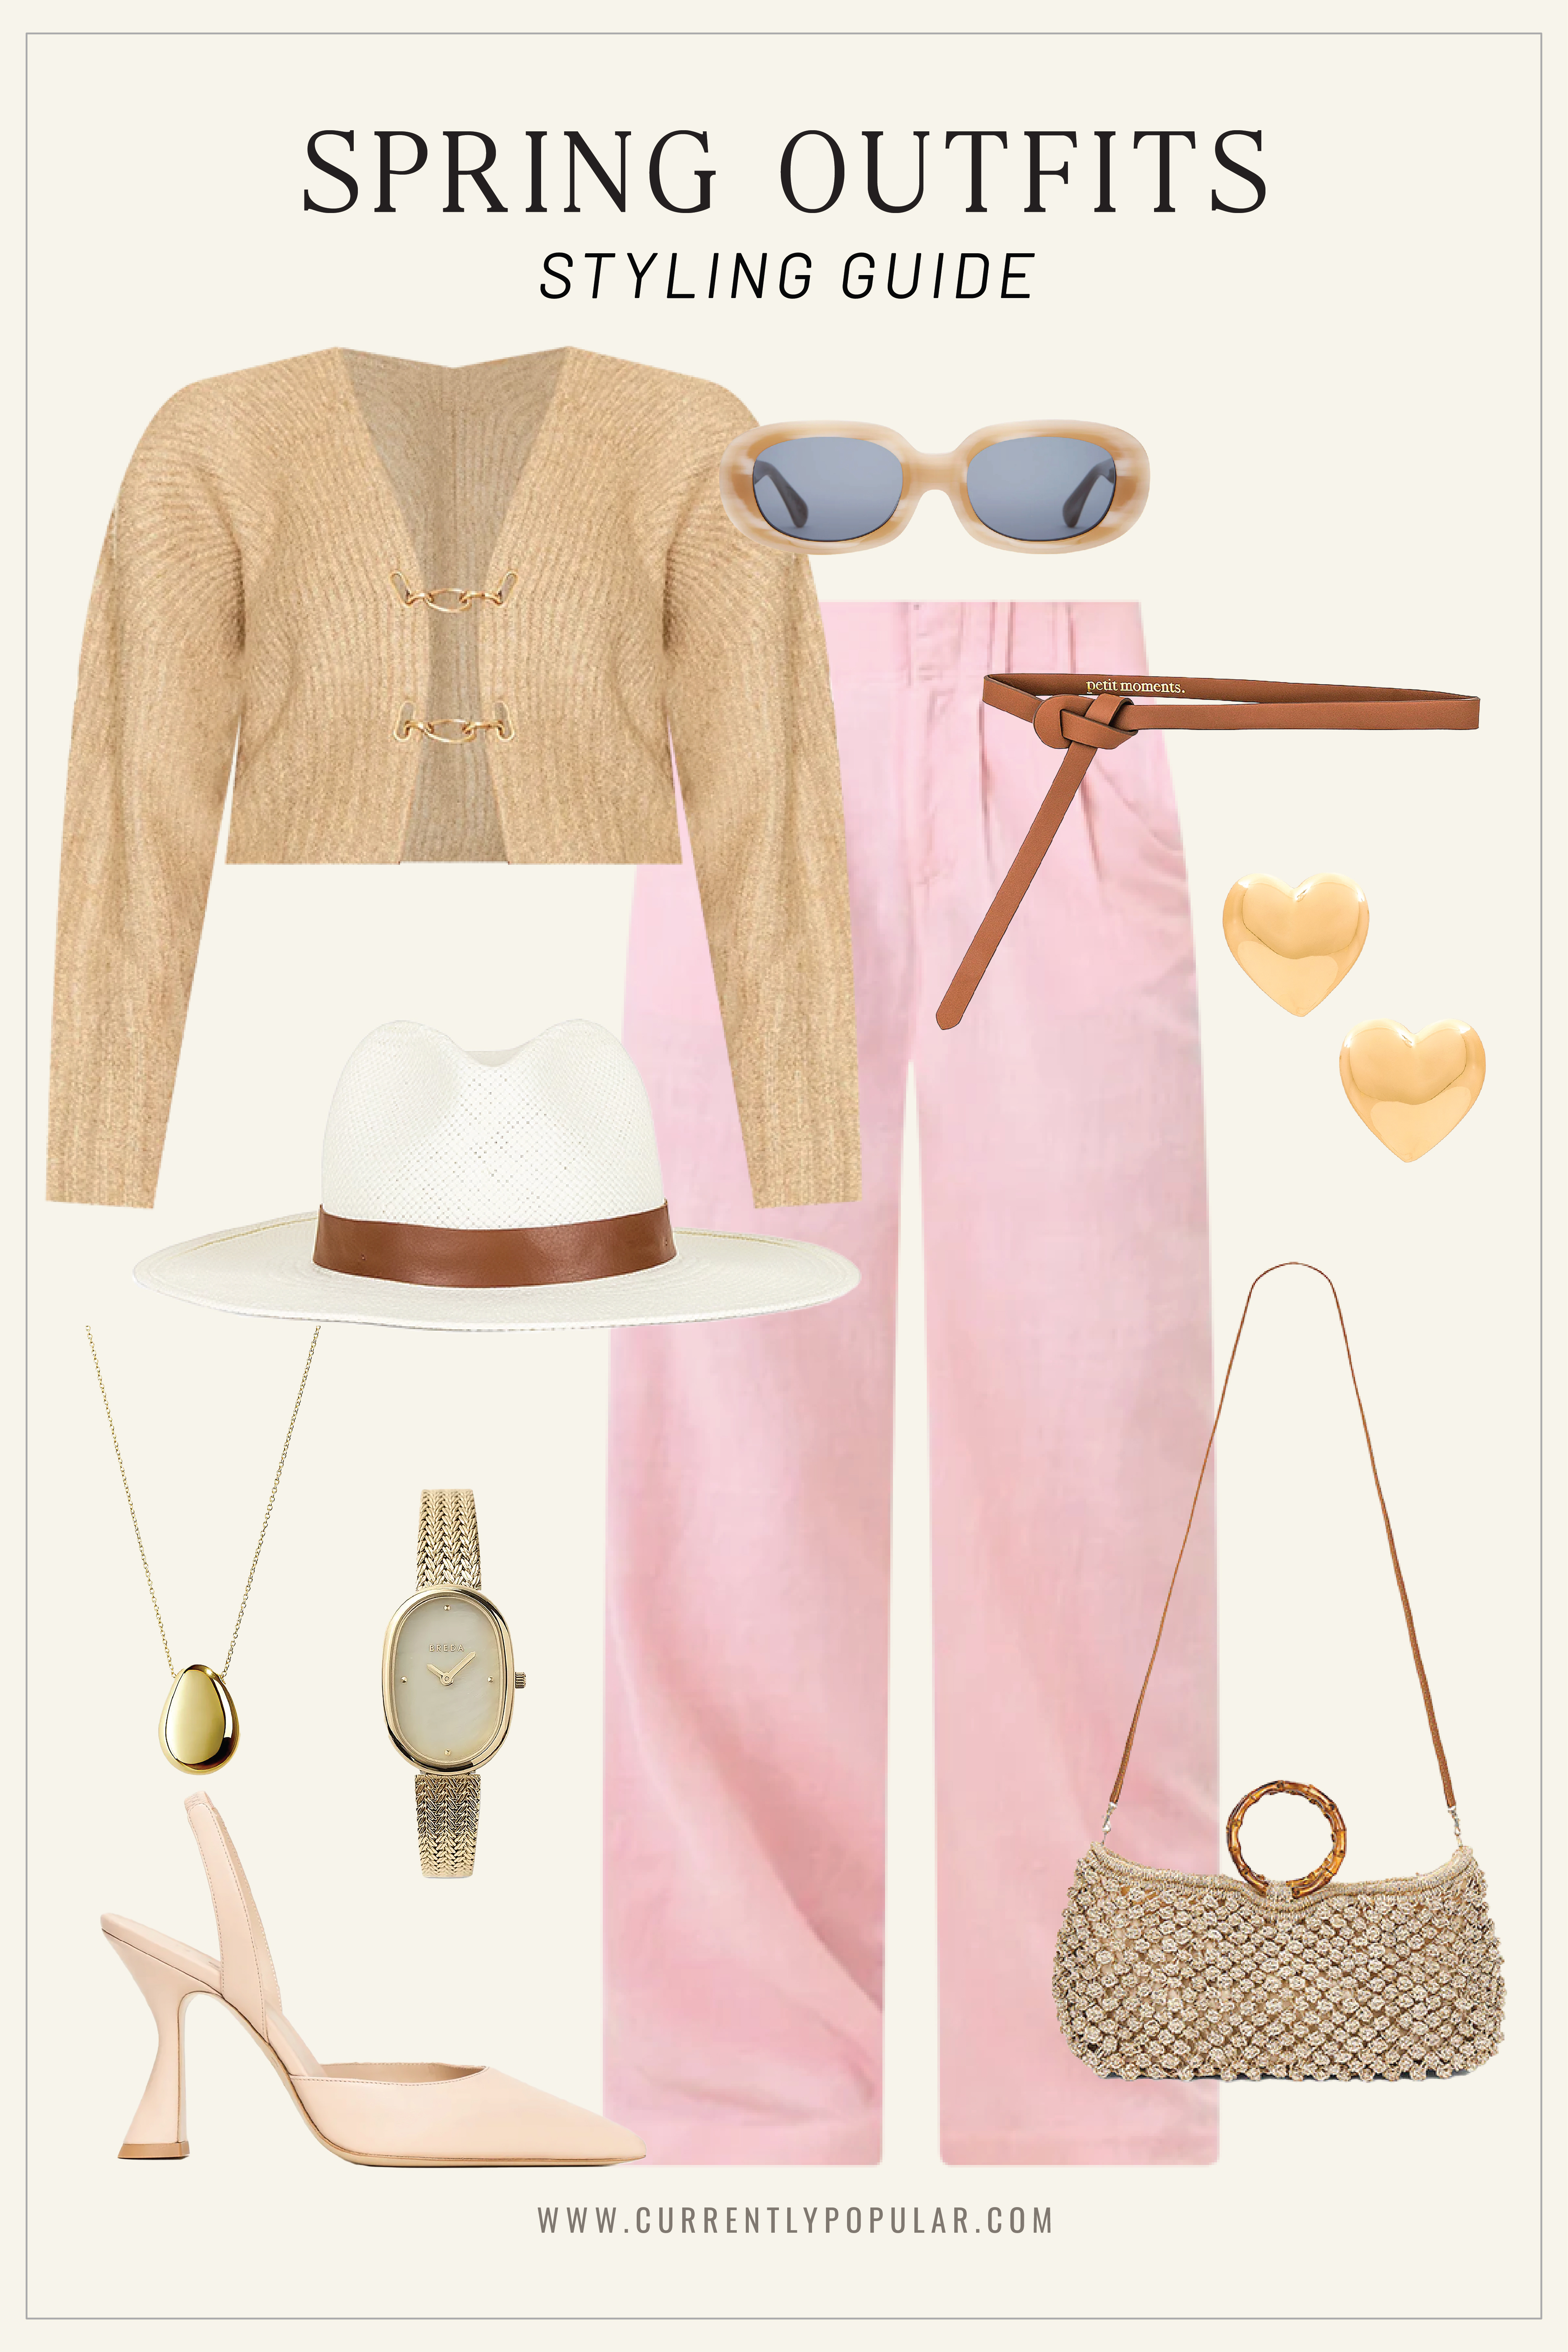 Casual Spring Outfit: Knit Cardigan, Pink Trousers, Nude Heels, White Wide-Brim Hat, Gold Heart Earrings, Brown Leather Belt.